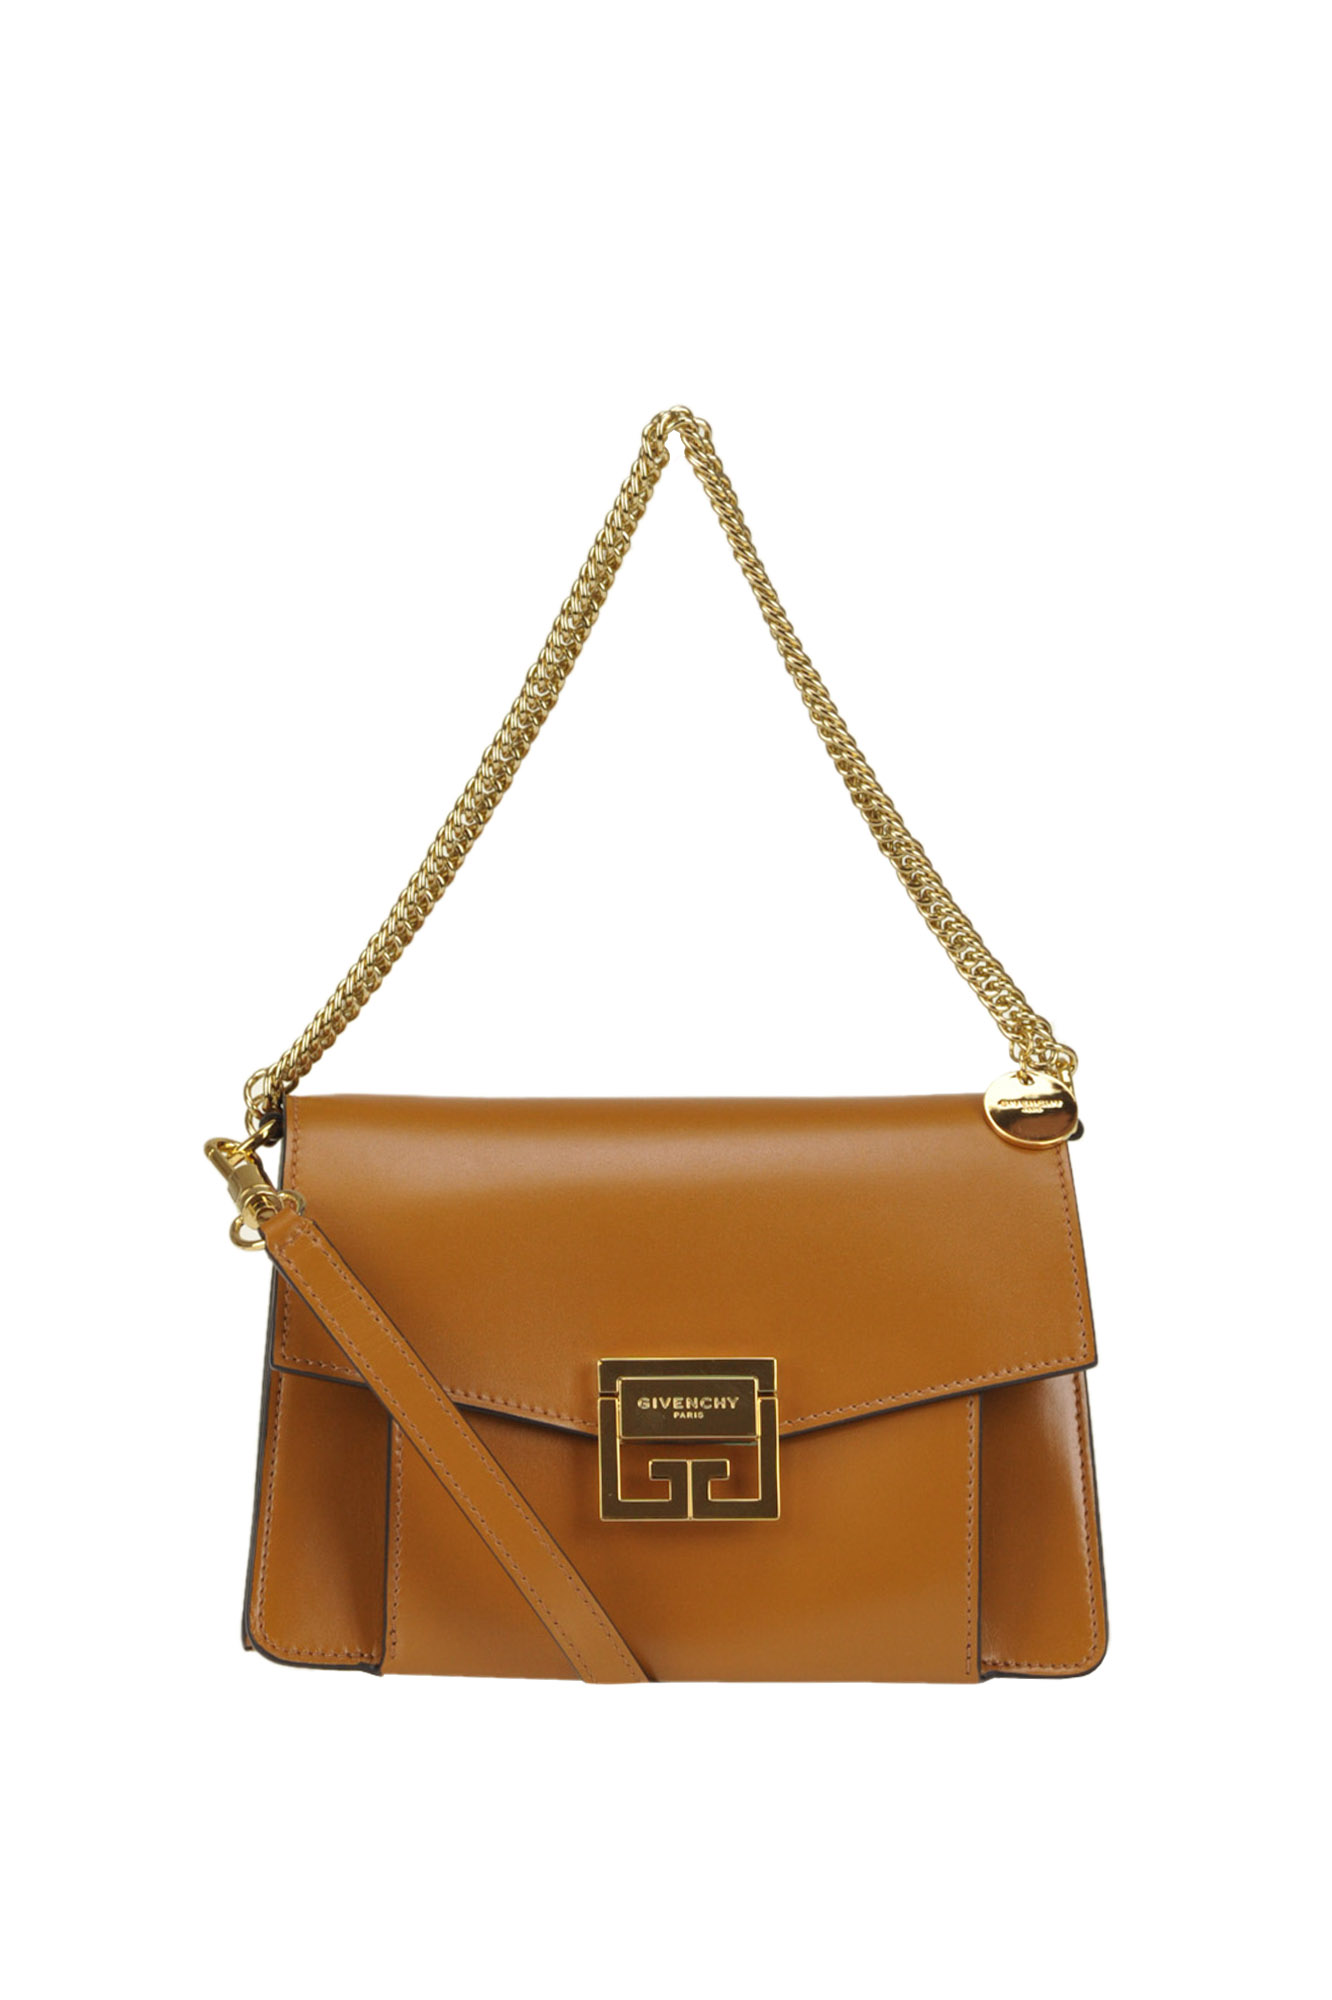 Givenchy Gv3 Small Leather Shoulder Bag In Light Brown | ModeSens